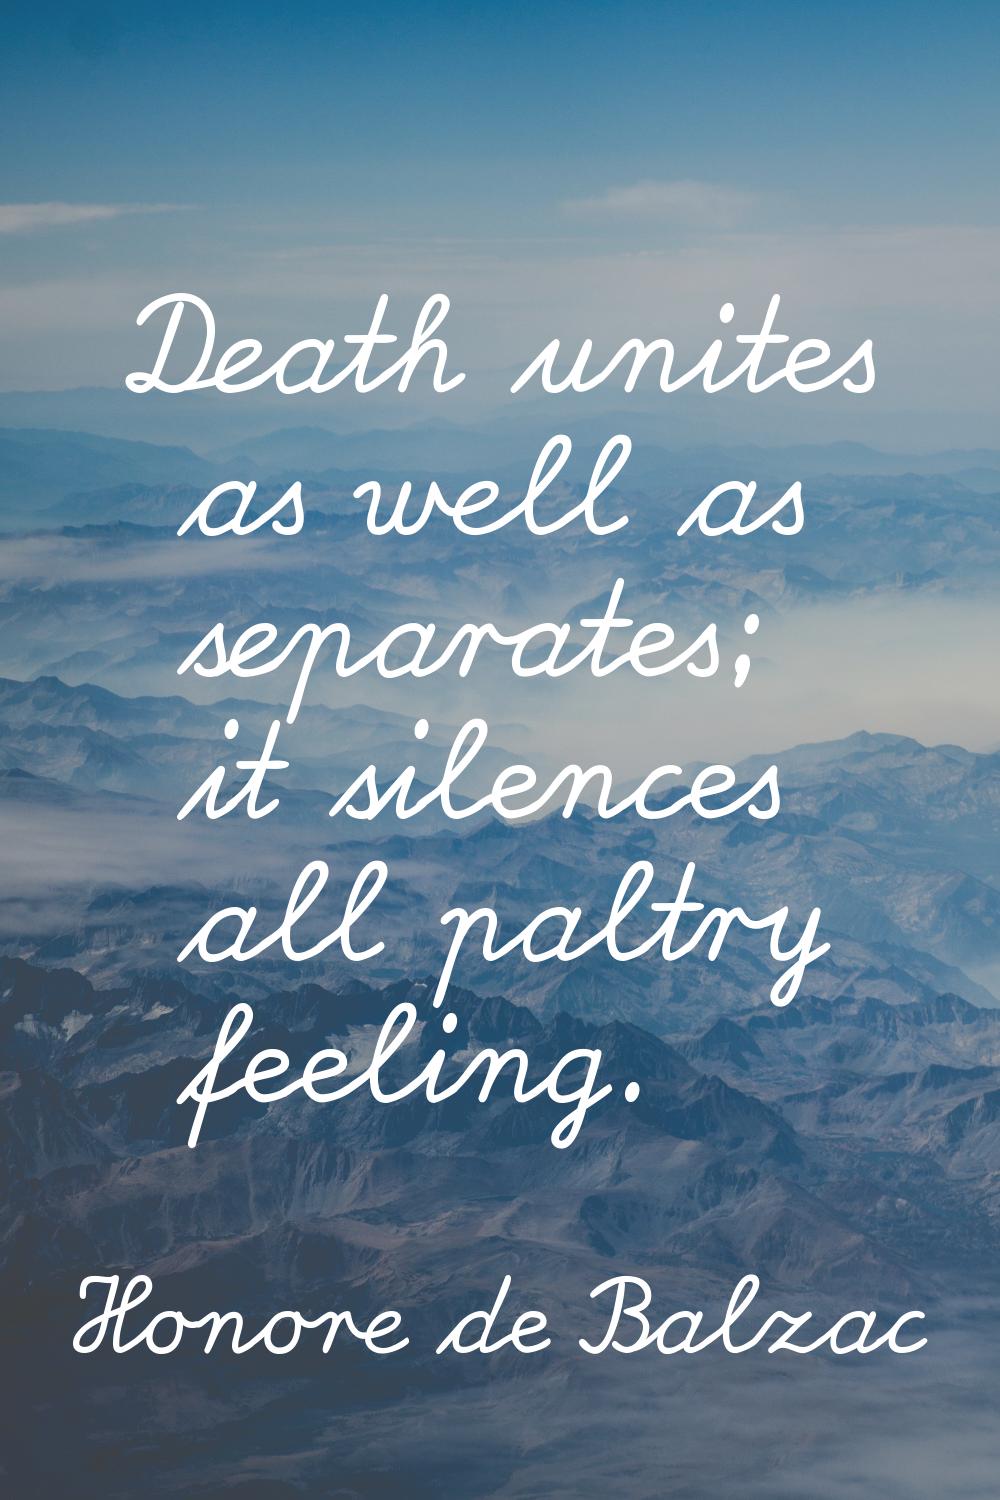 Death unites as well as separates; it silences all paltry feeling.